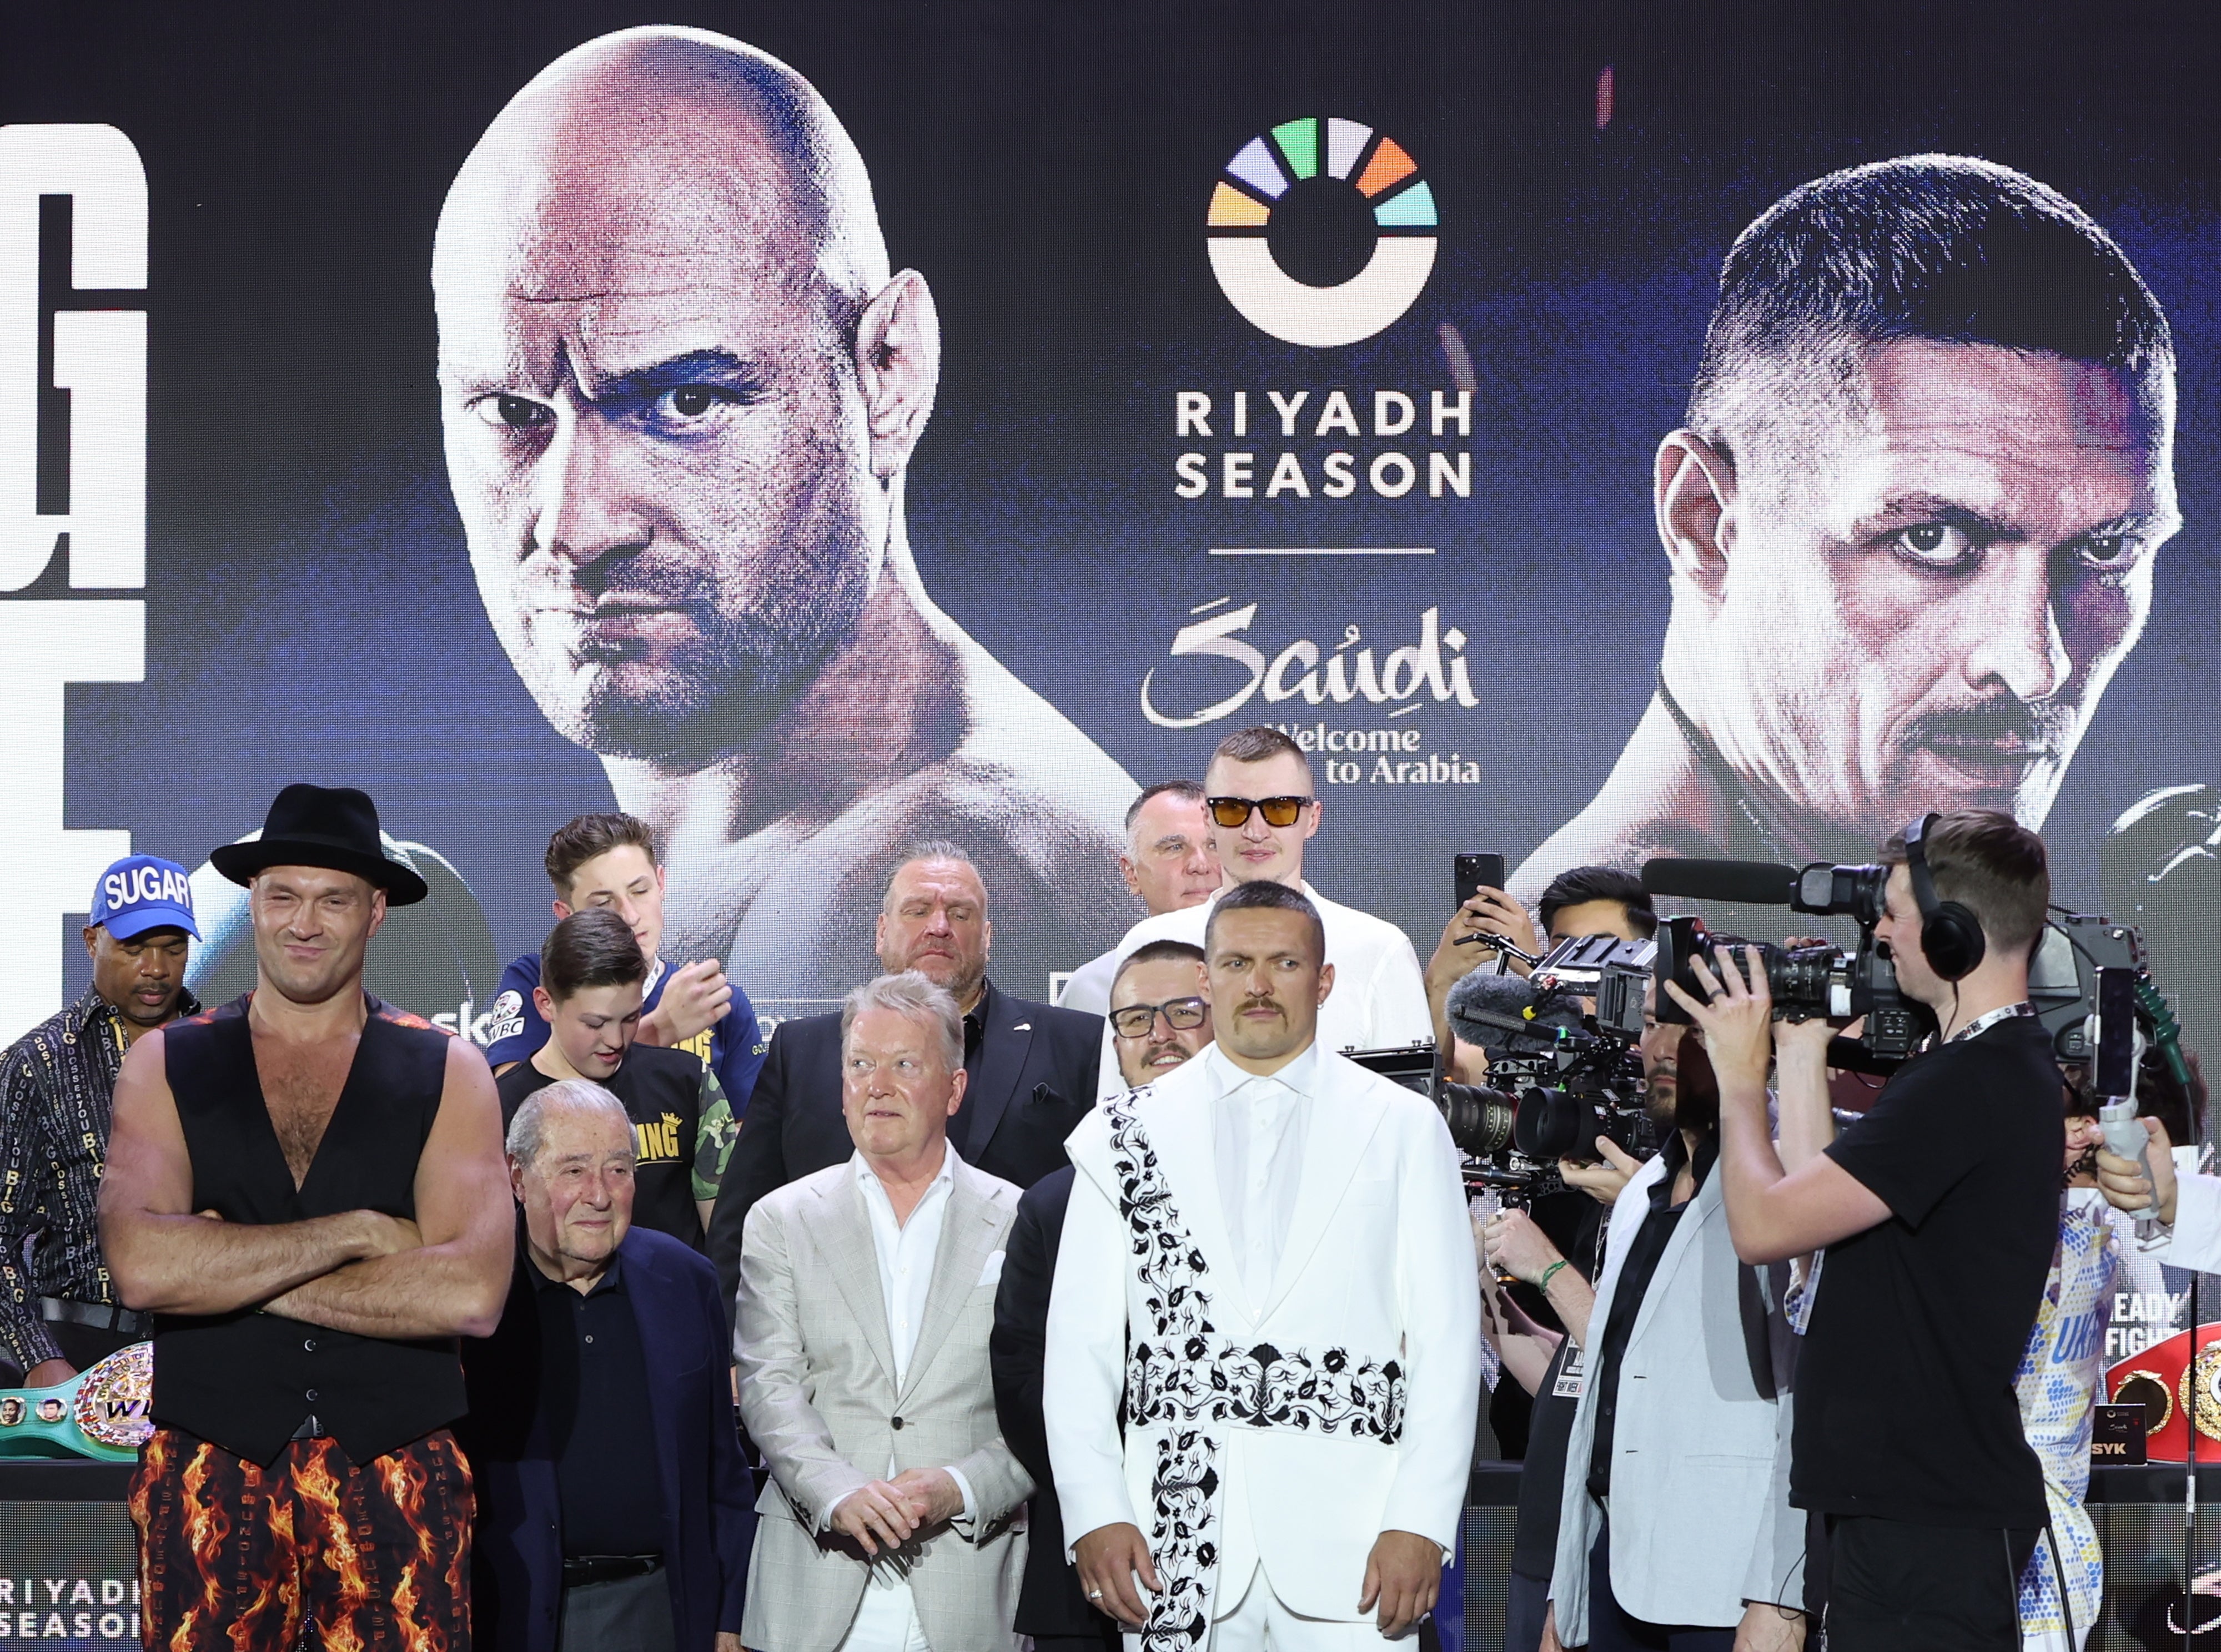 British boxer Tyson Fury (L) and Oleksandr Usyk (C-R) of Ukraine pose after attending a press conference in Riyadh, Saudi Arabia